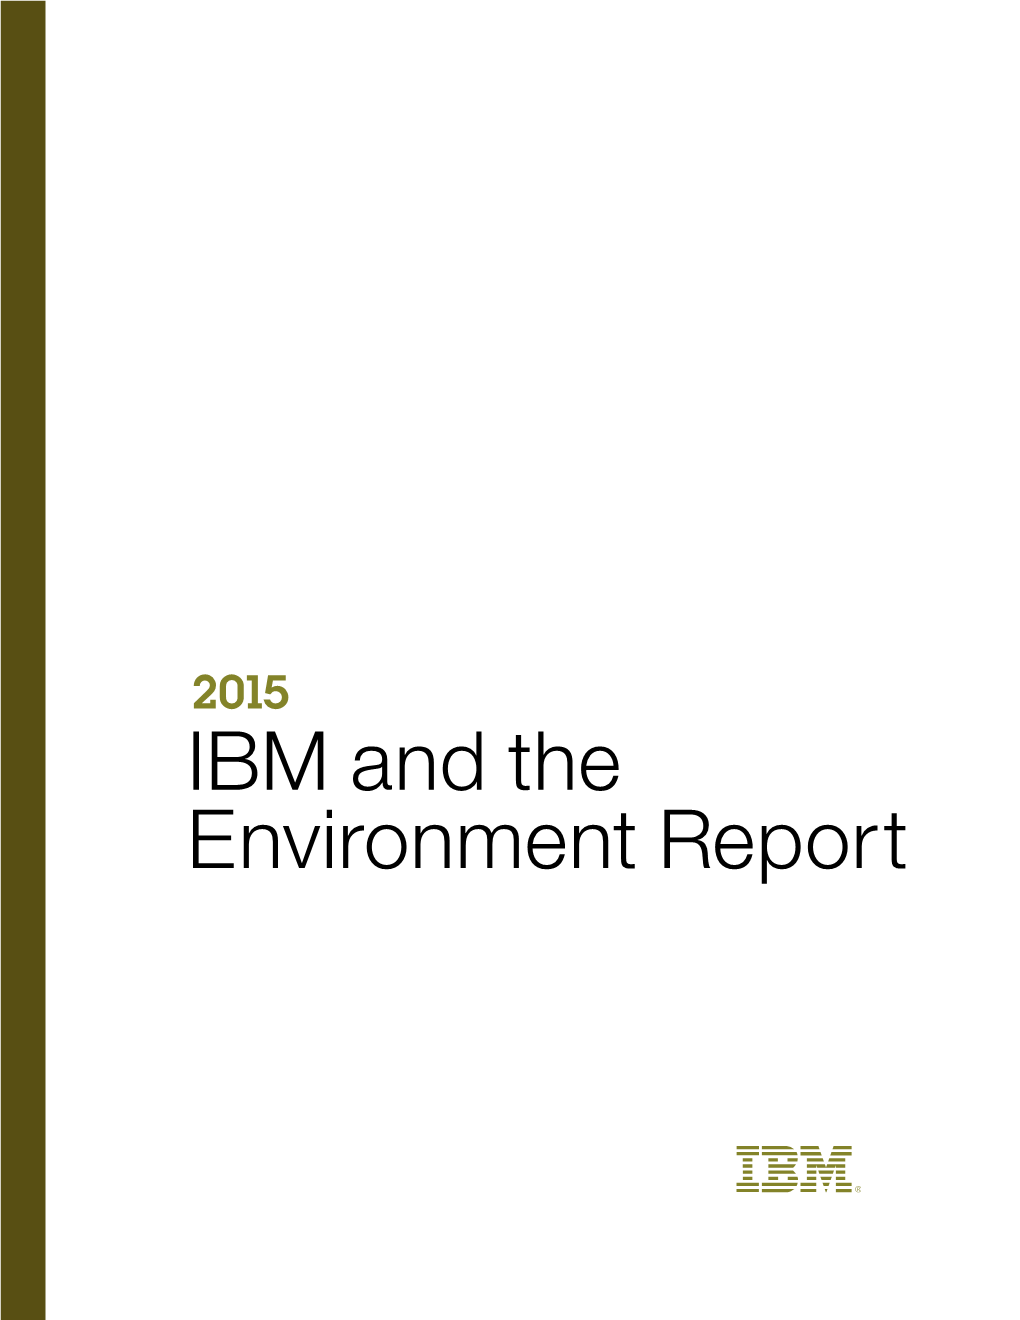 2015 IBM and the Environment Report 2 2015 IBM and the Environment Report